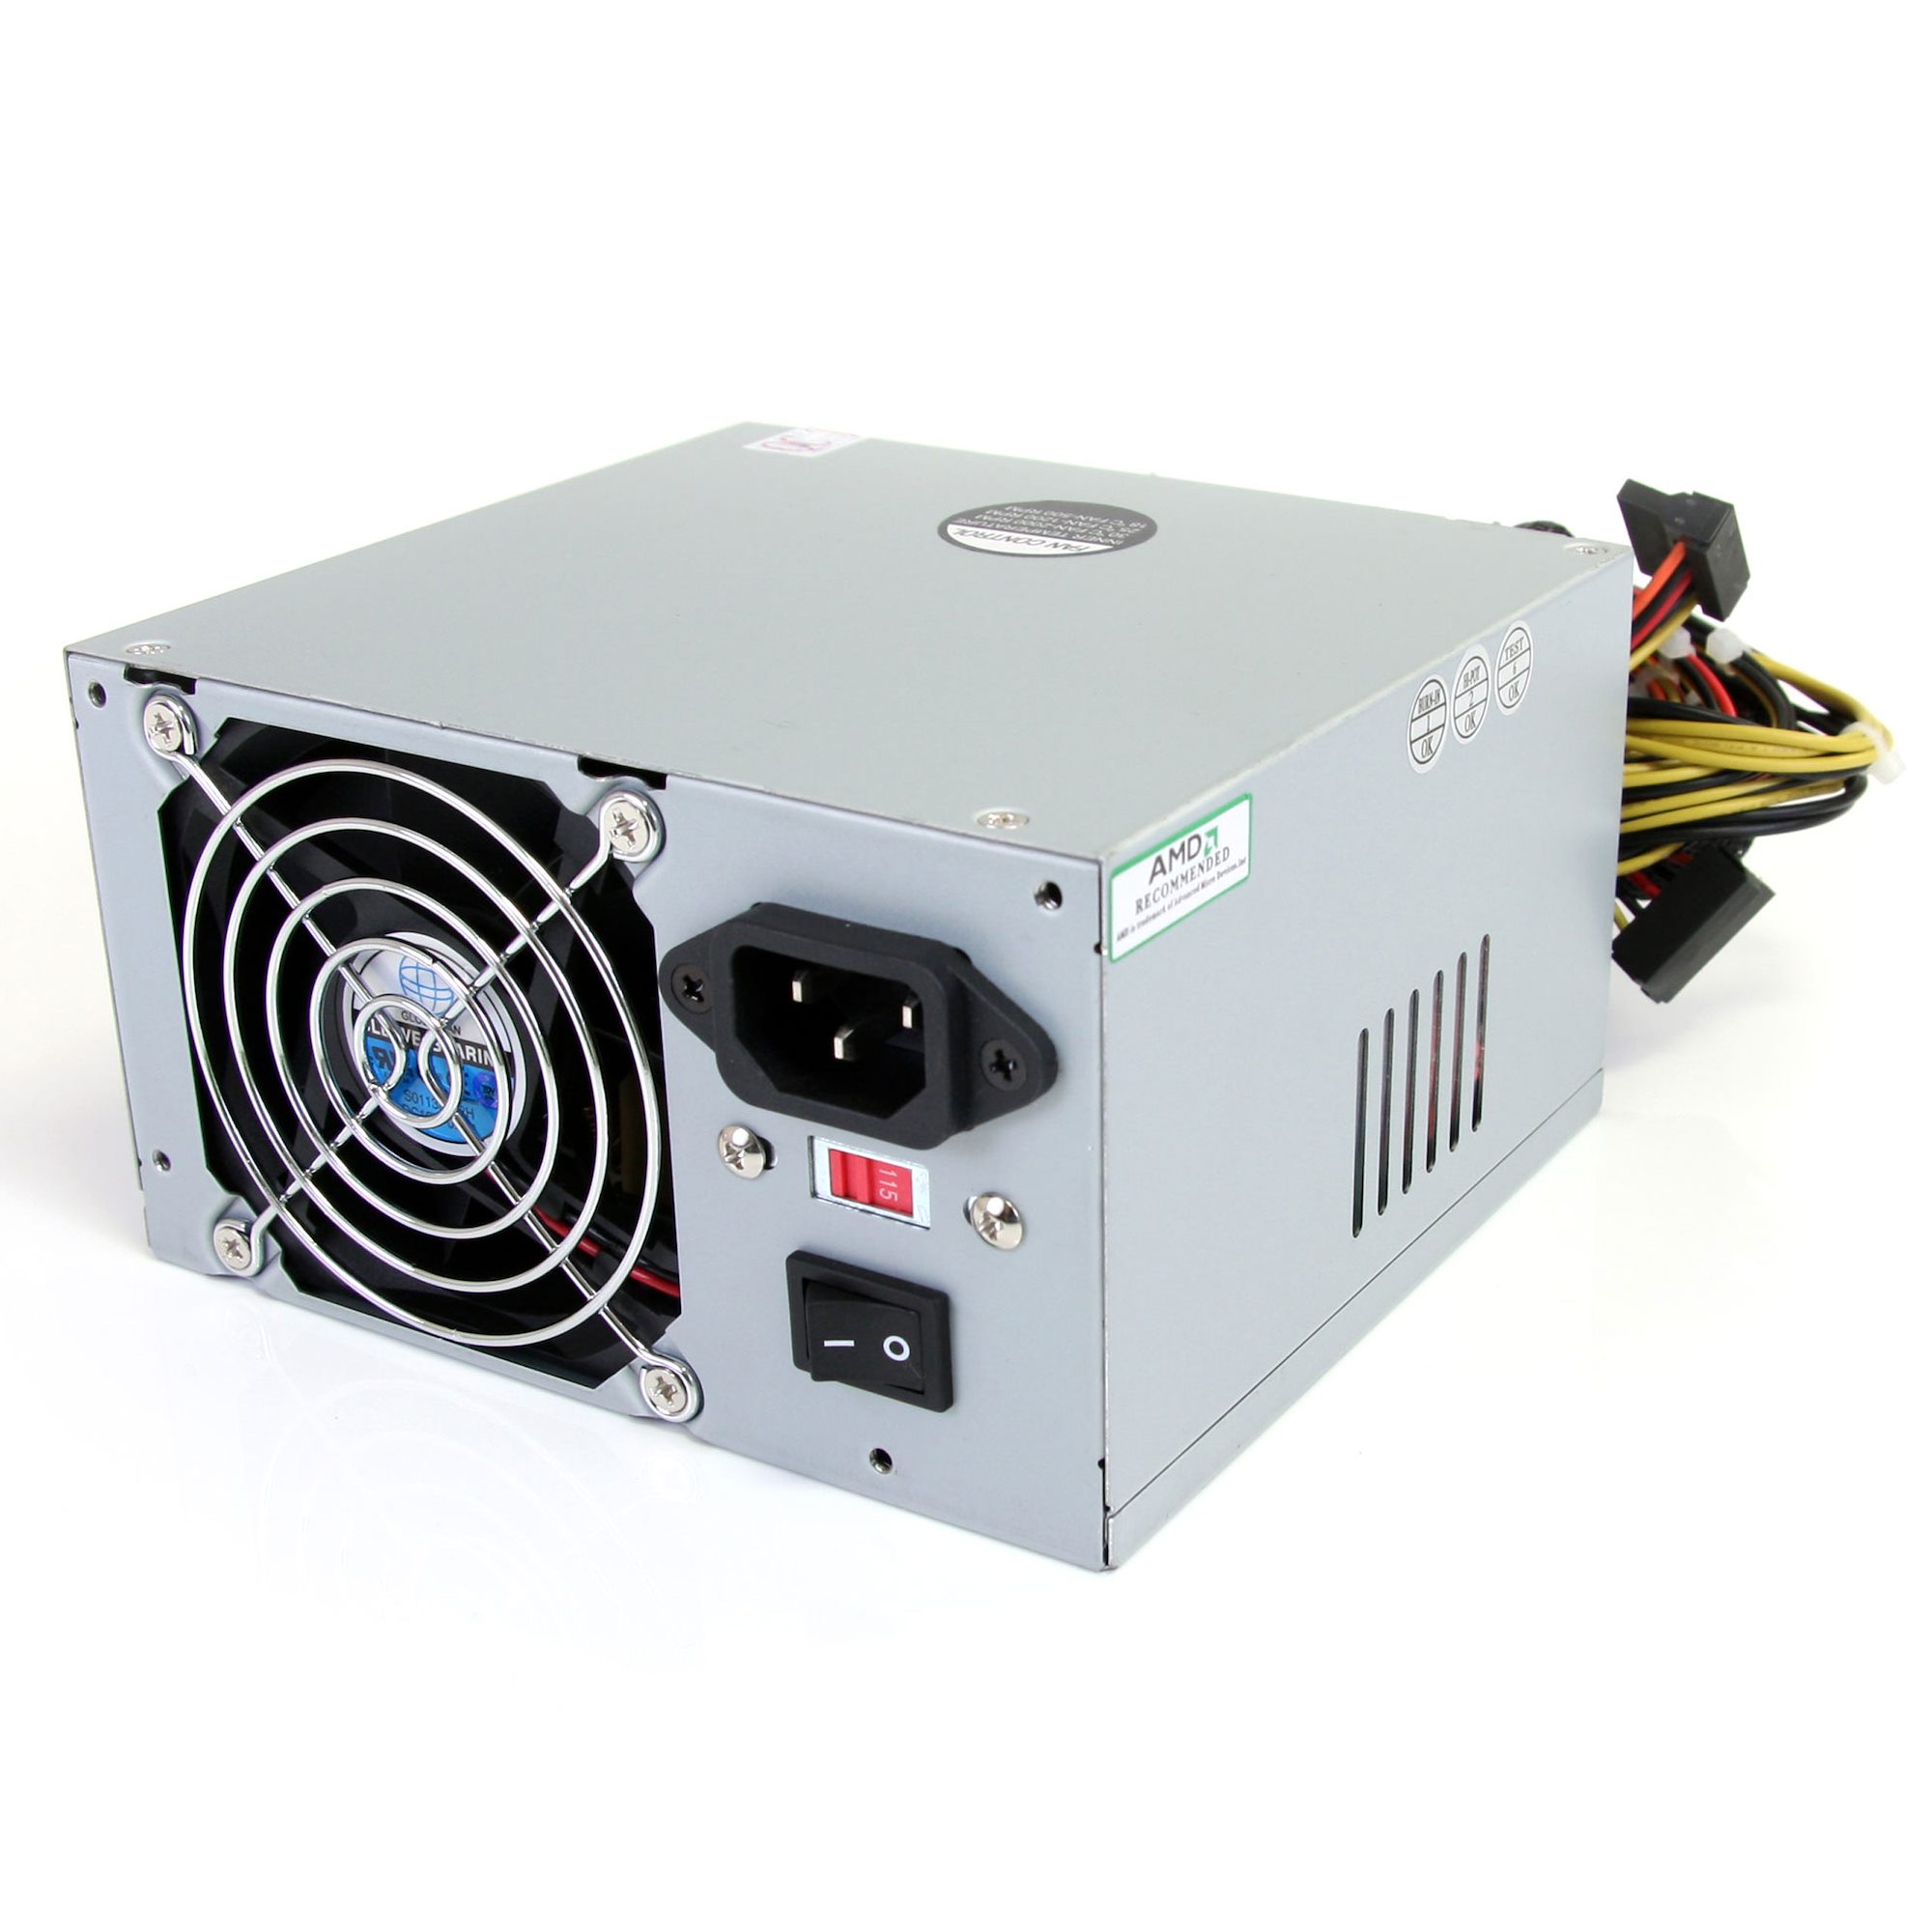 What is an ATX PSU